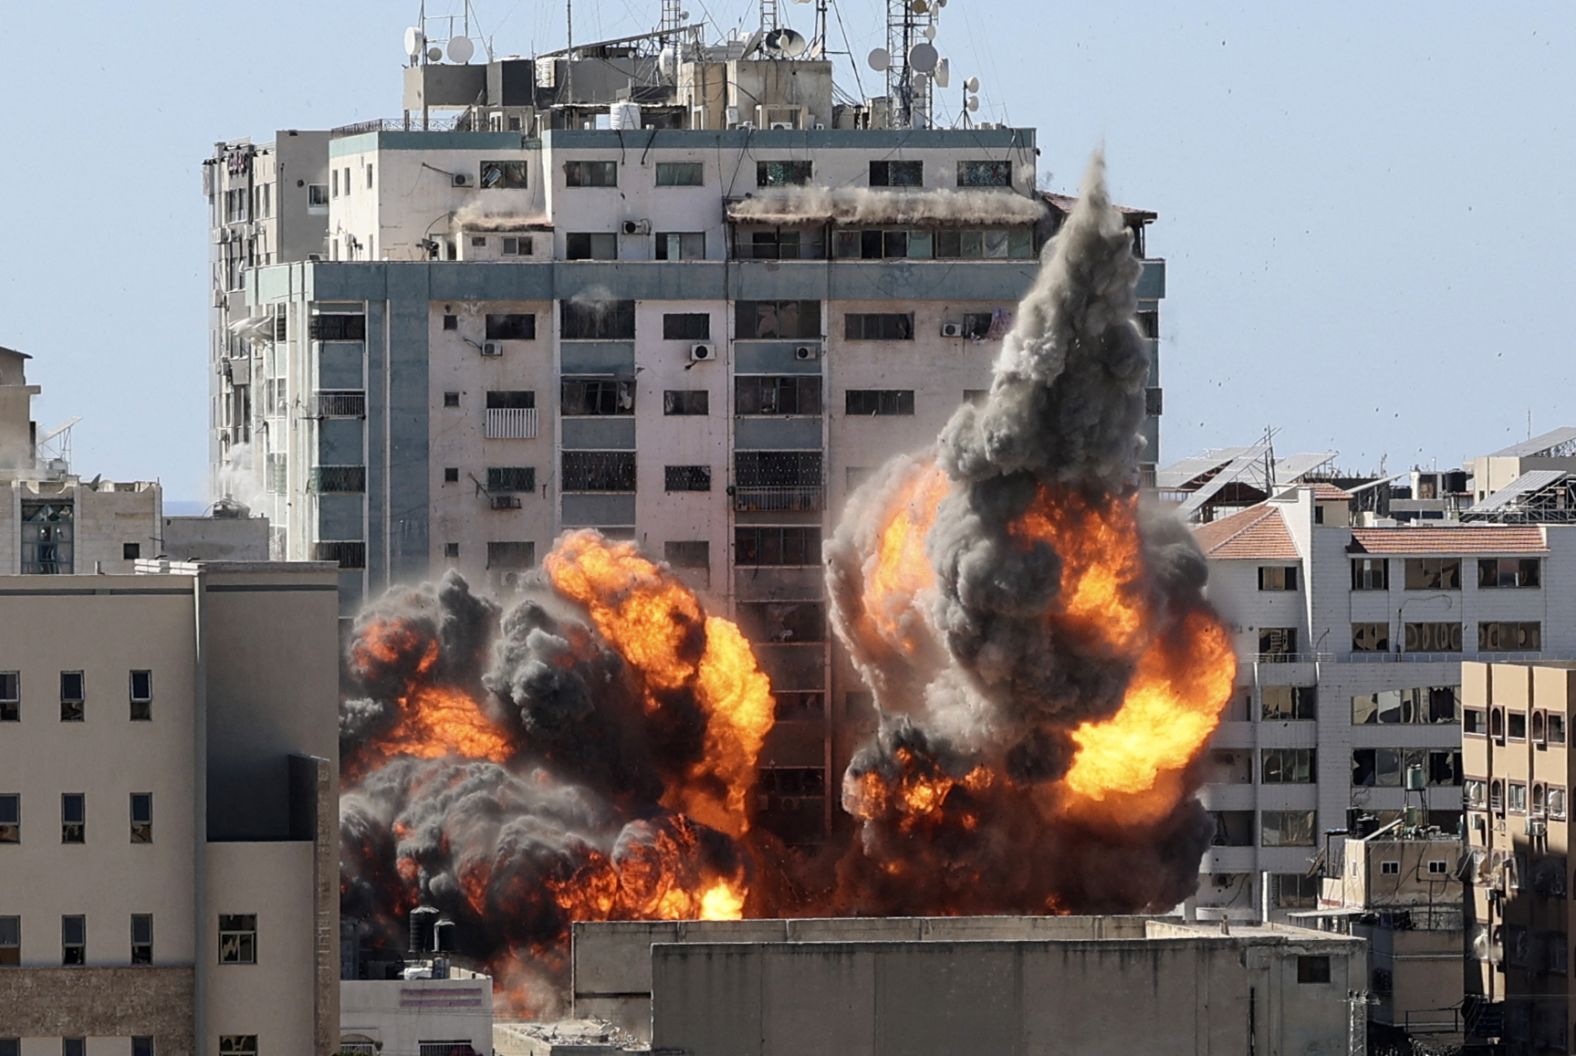 A ball of fire erupts from the Jala'a Tower, which houses the Associated Press, Al Jazeera and other media offices, as it is <a href="https://www.cnn.com/2021/05/15/media/associated-press-al-jazeera-gaza-bombings/index.html" target="_blank">destroyed by an Israeli airstrike</a> in Gaza City on Saturday, May 15.